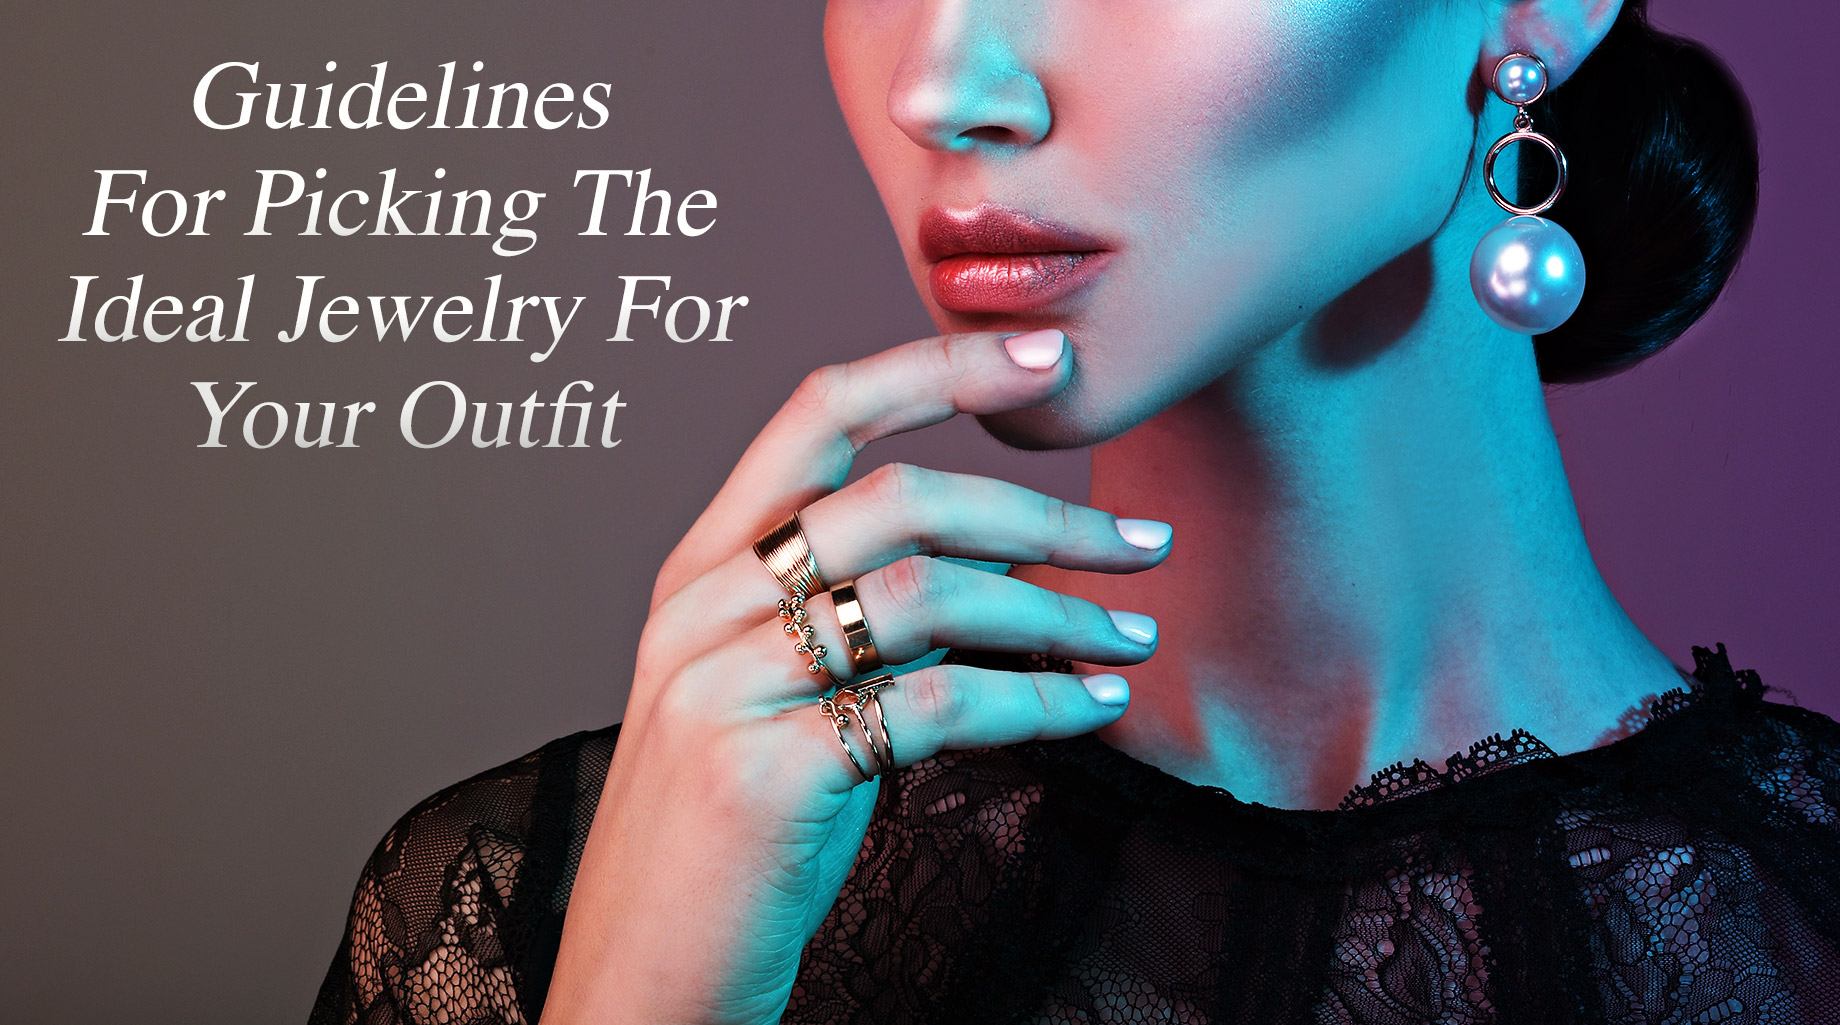 Guidelines For Picking The Ideal Jewelry For Your Outfit